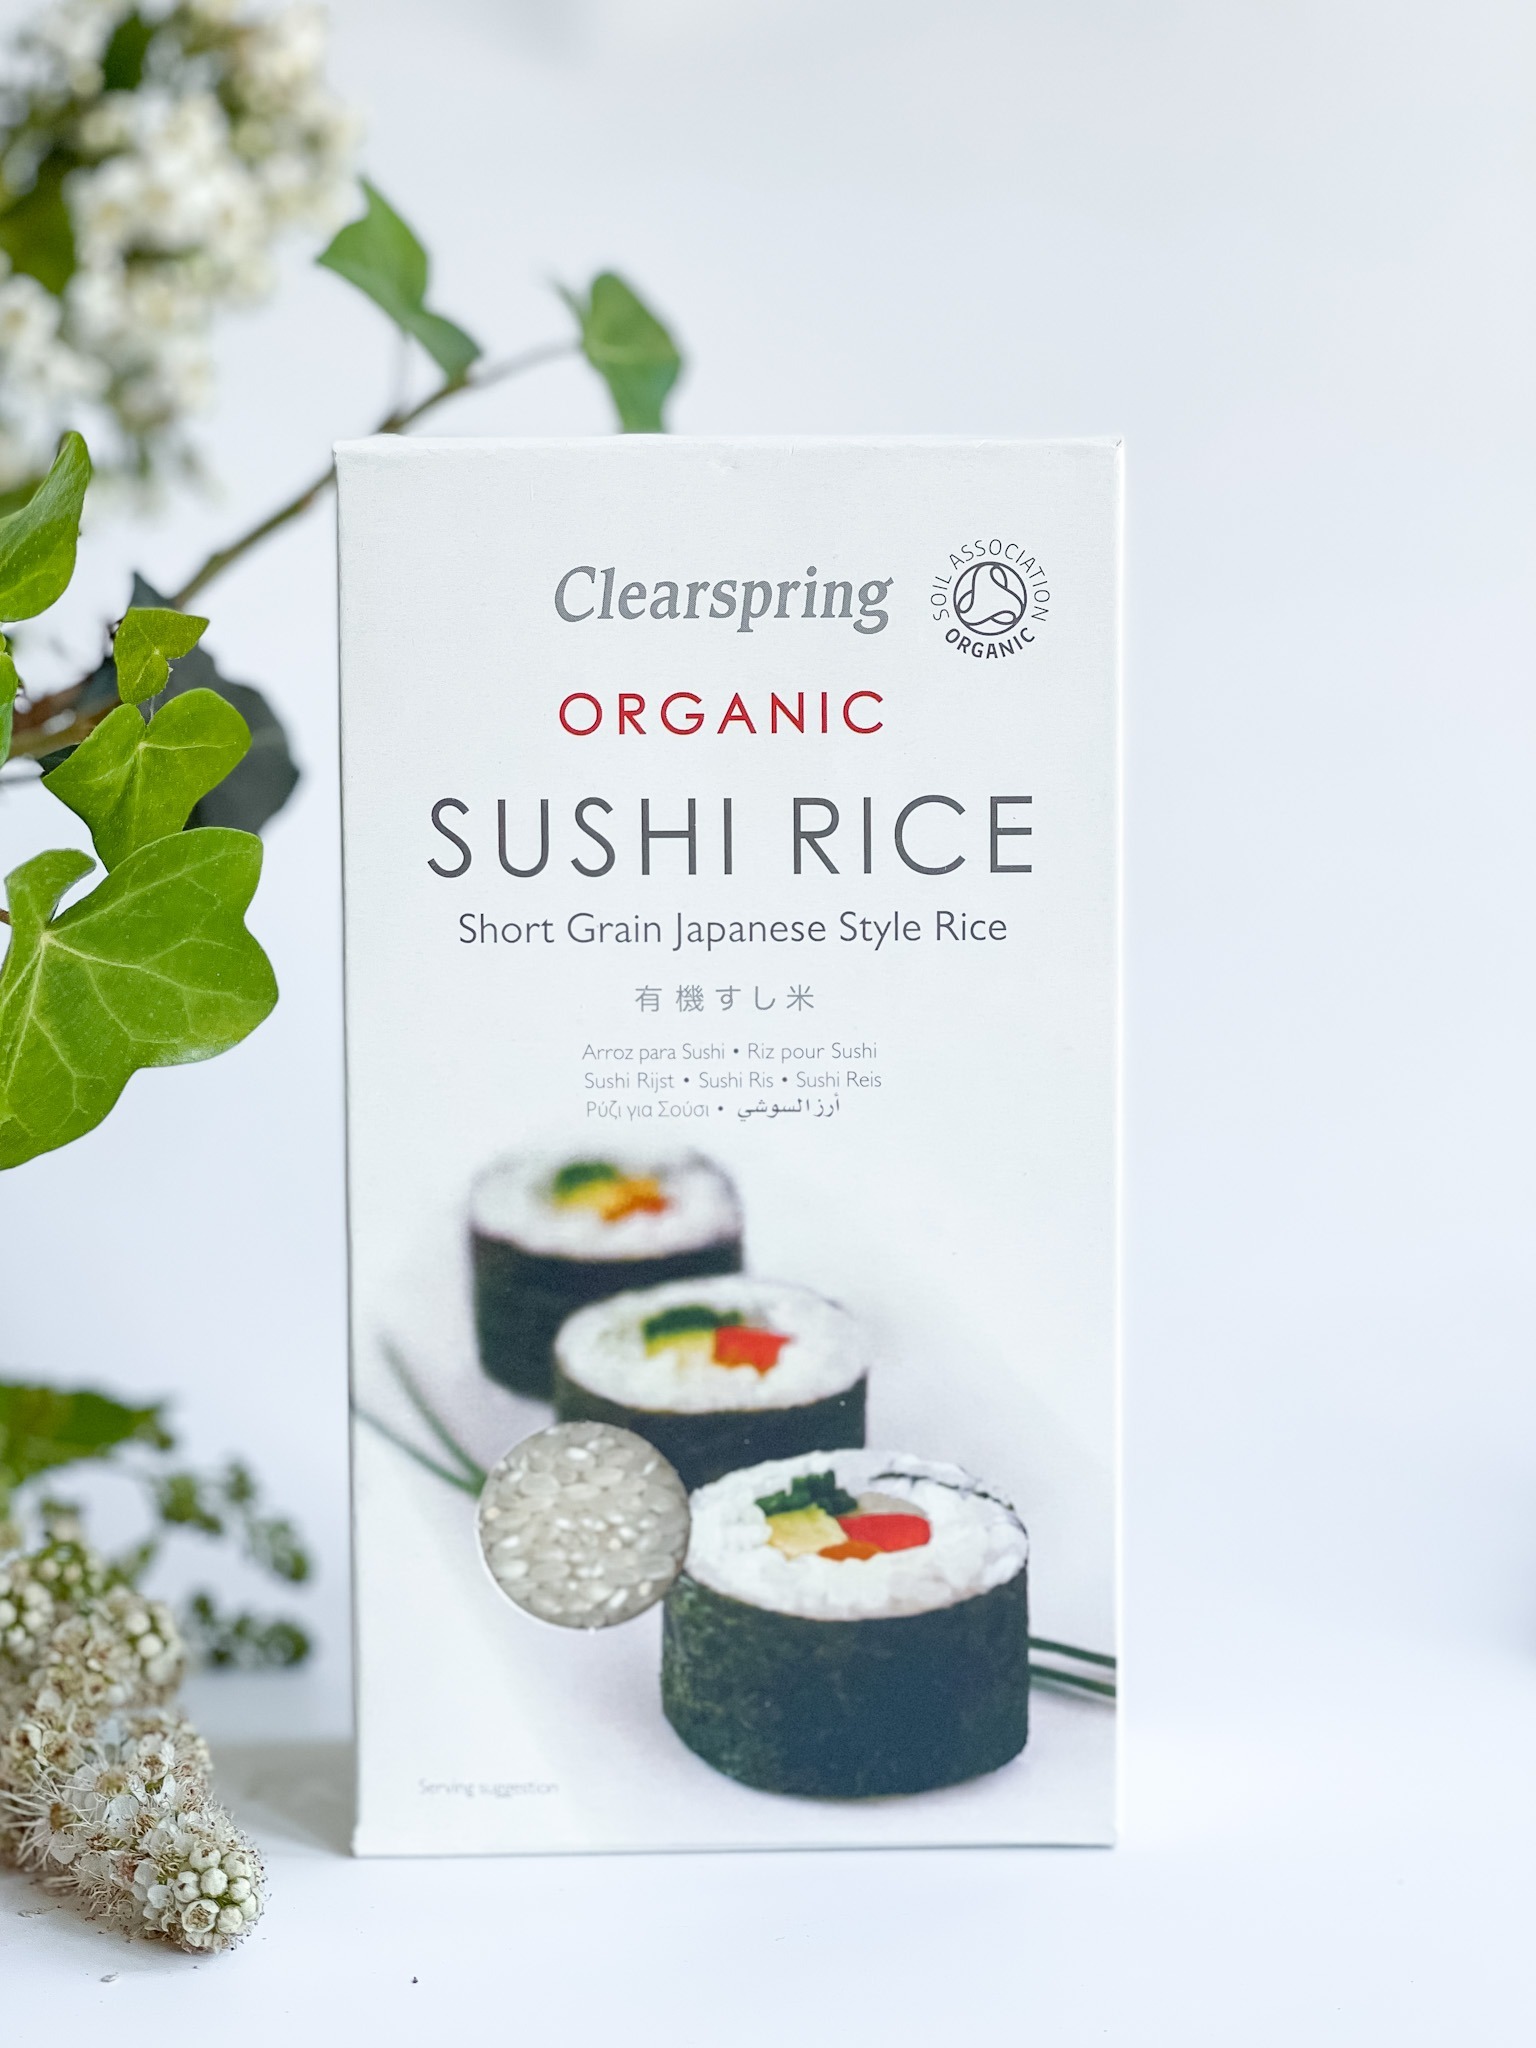 https://poetryofspices.com/wp-content/uploads/2022/07/Sushi-Rice-1-1.jpg